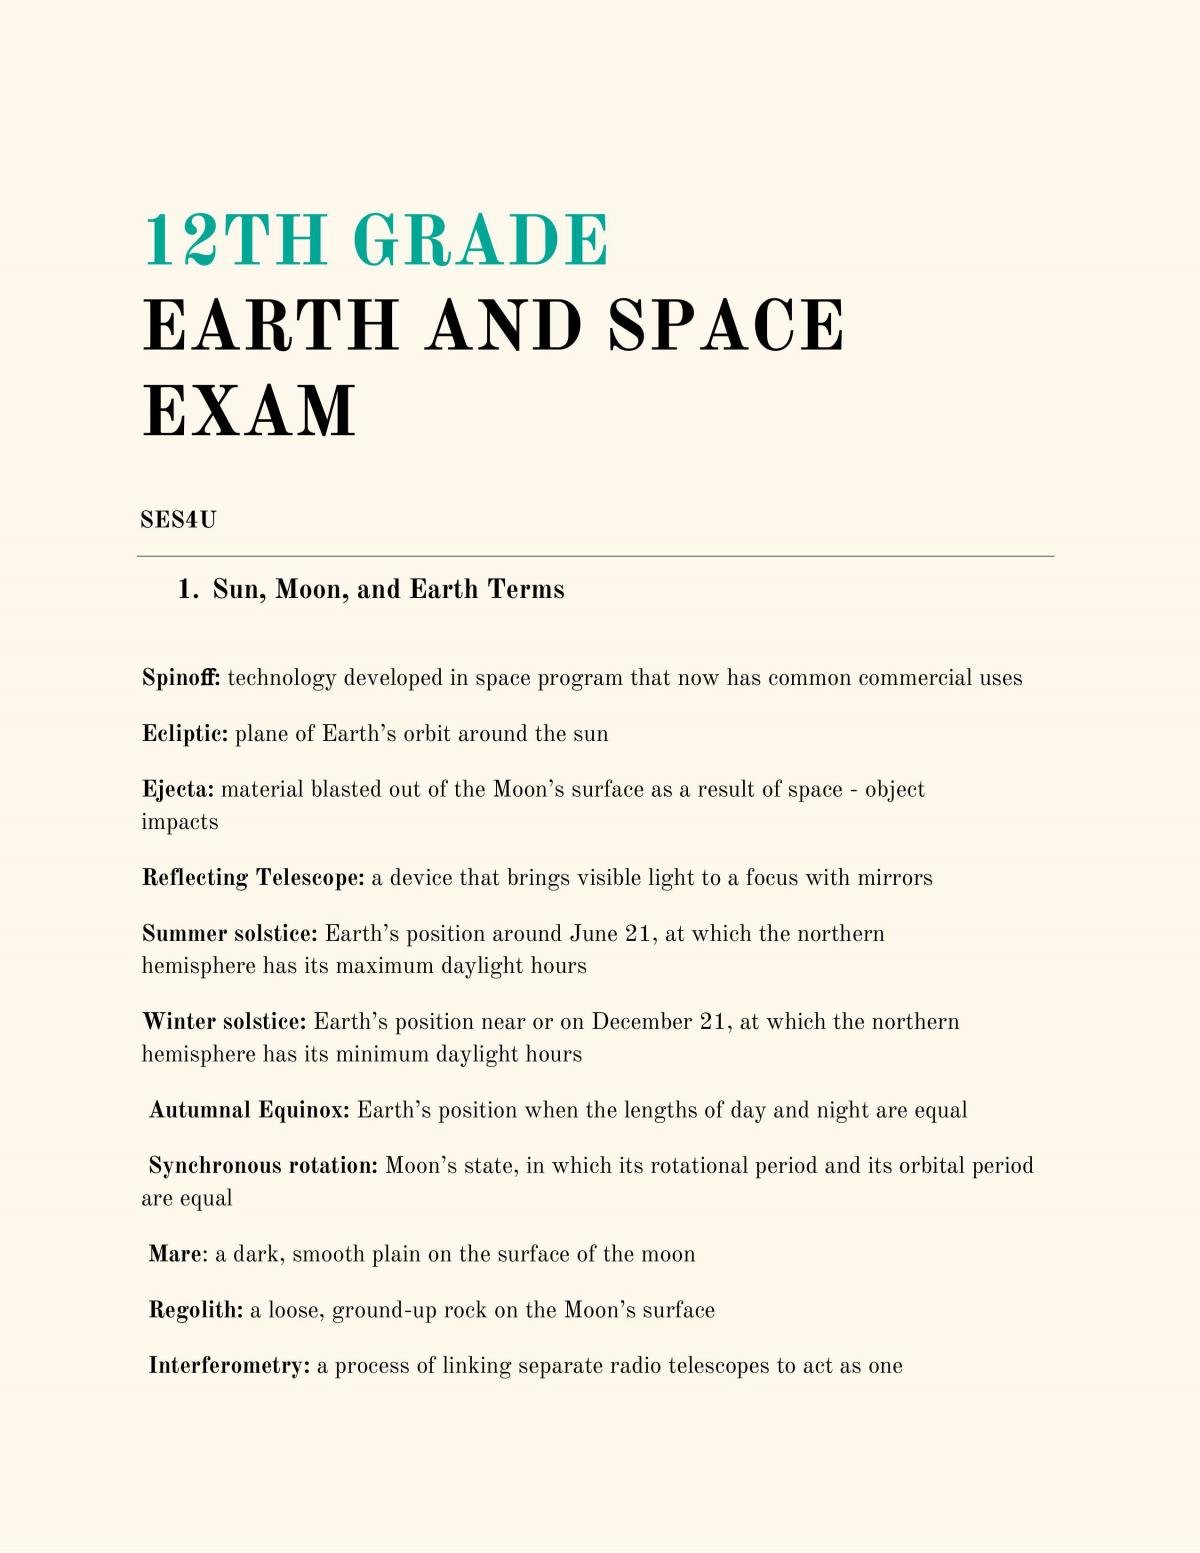 Earth and Space Review - Page 1